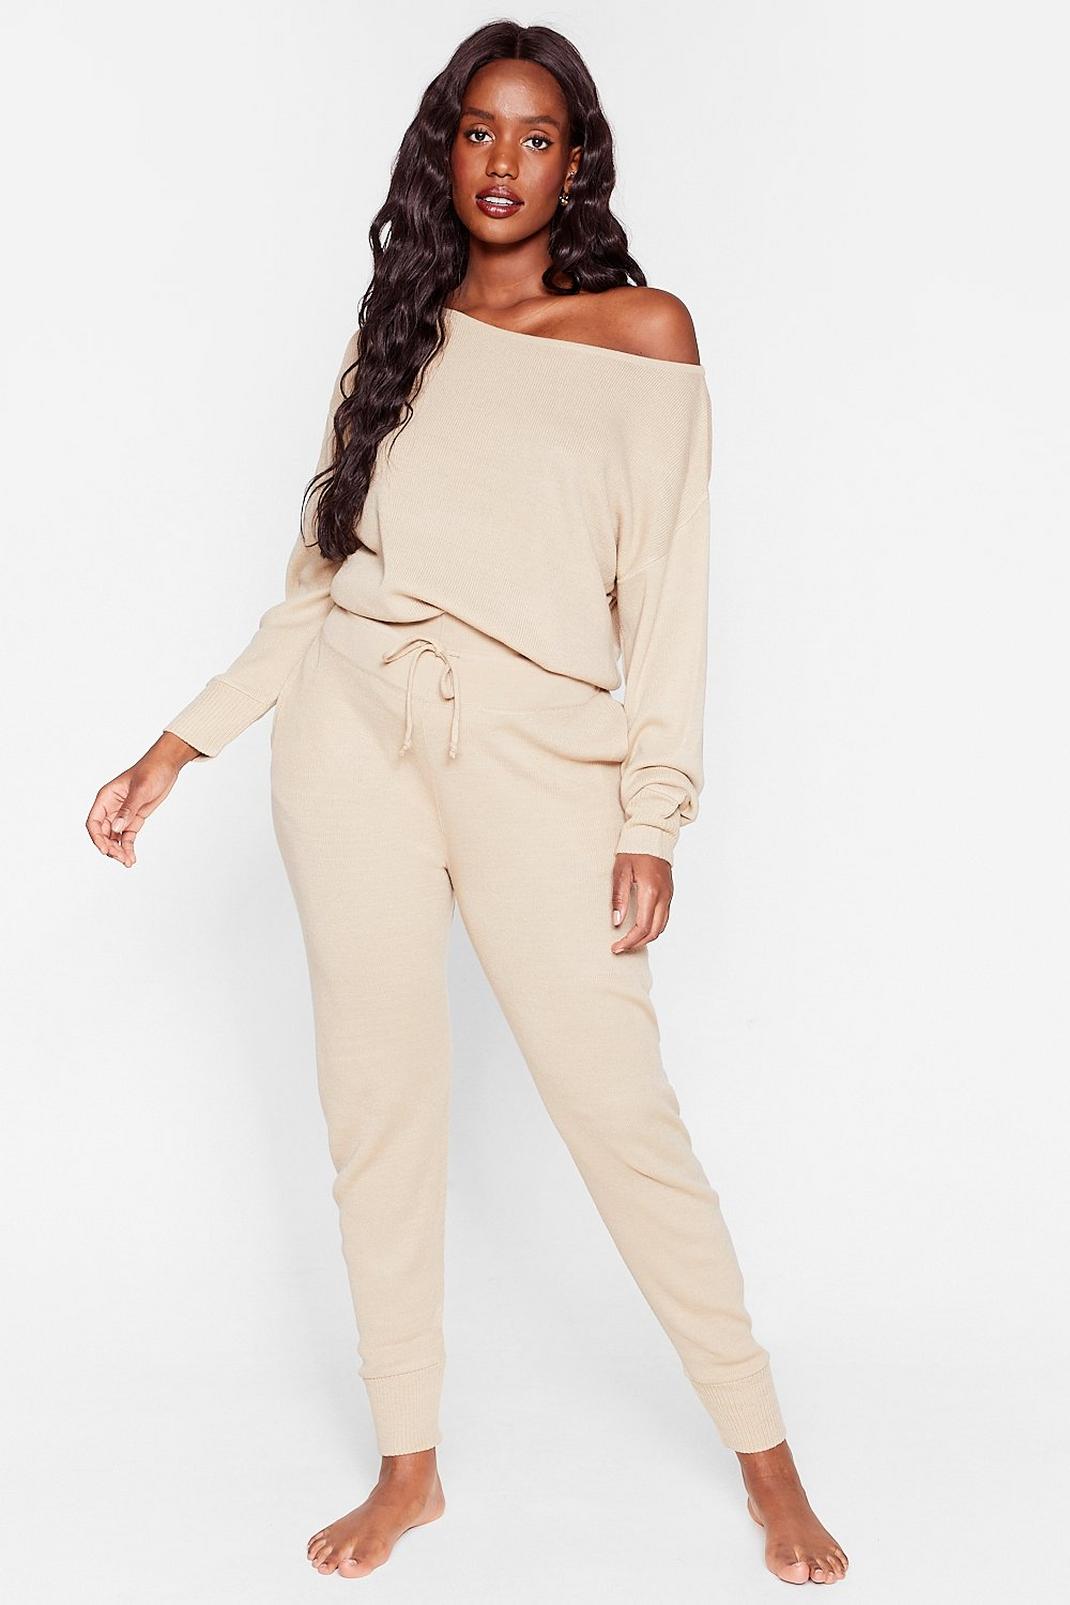 Plus Size Knit Sweater and Jogger Set Nasty Gal